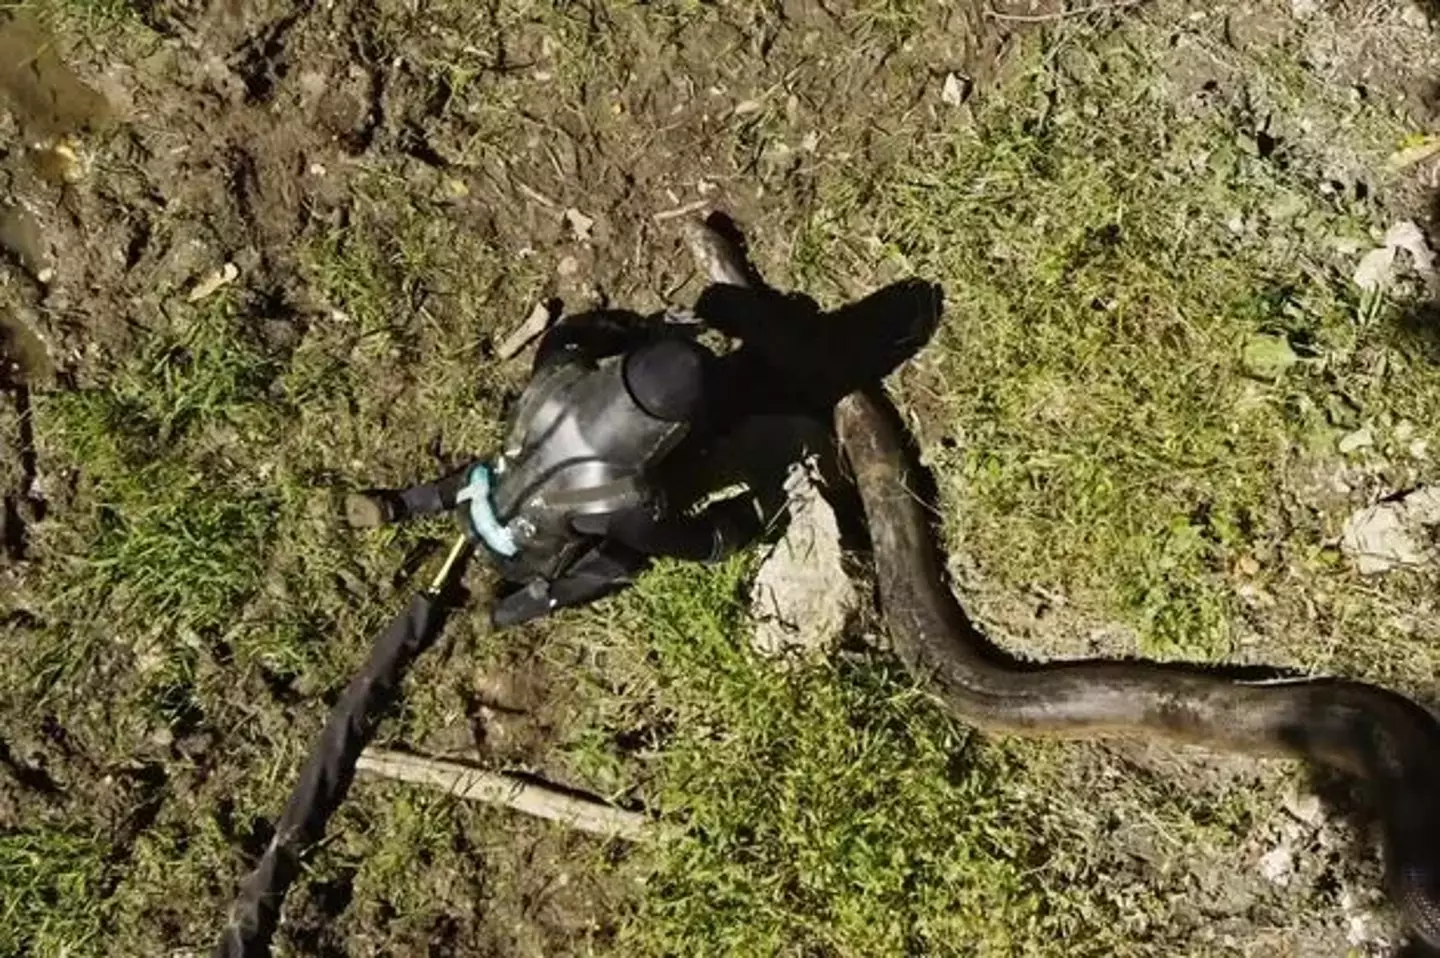 Rosolie approached the green anaconda on all fours (Discovery Channel)